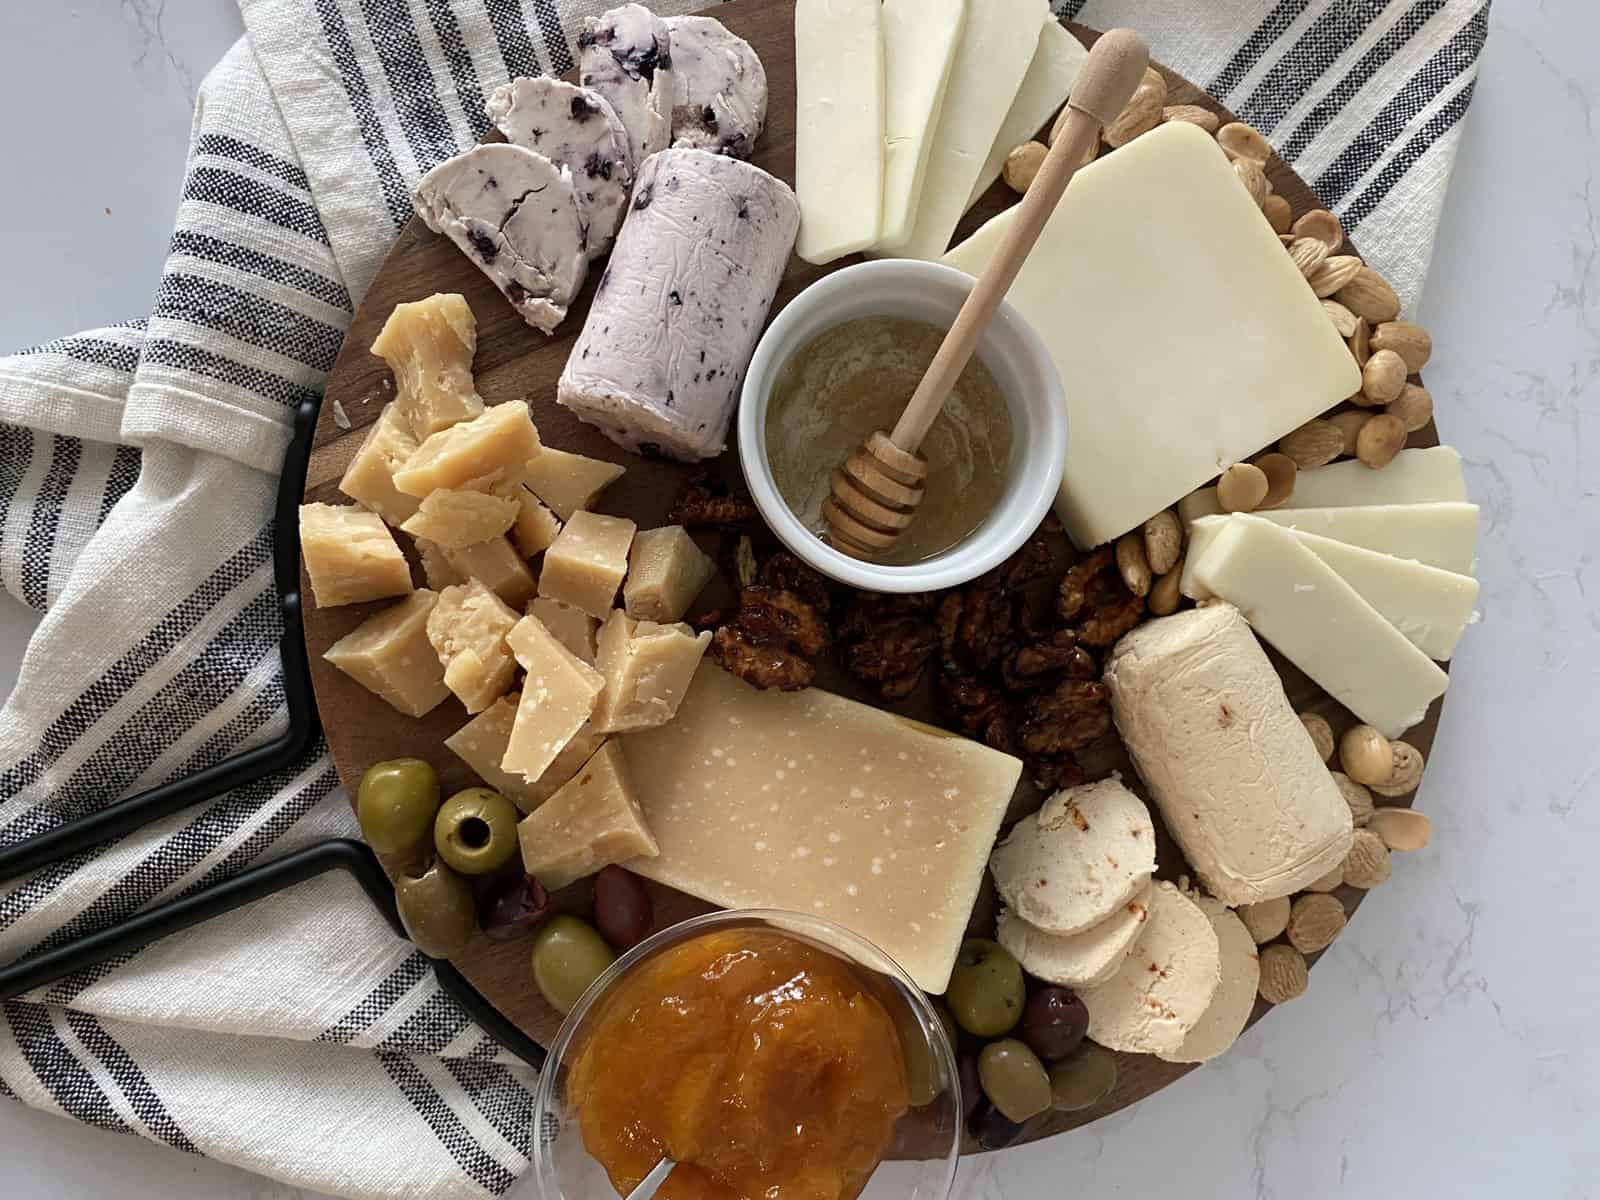 LaClare-Family-Creamery-Cheese-Plate